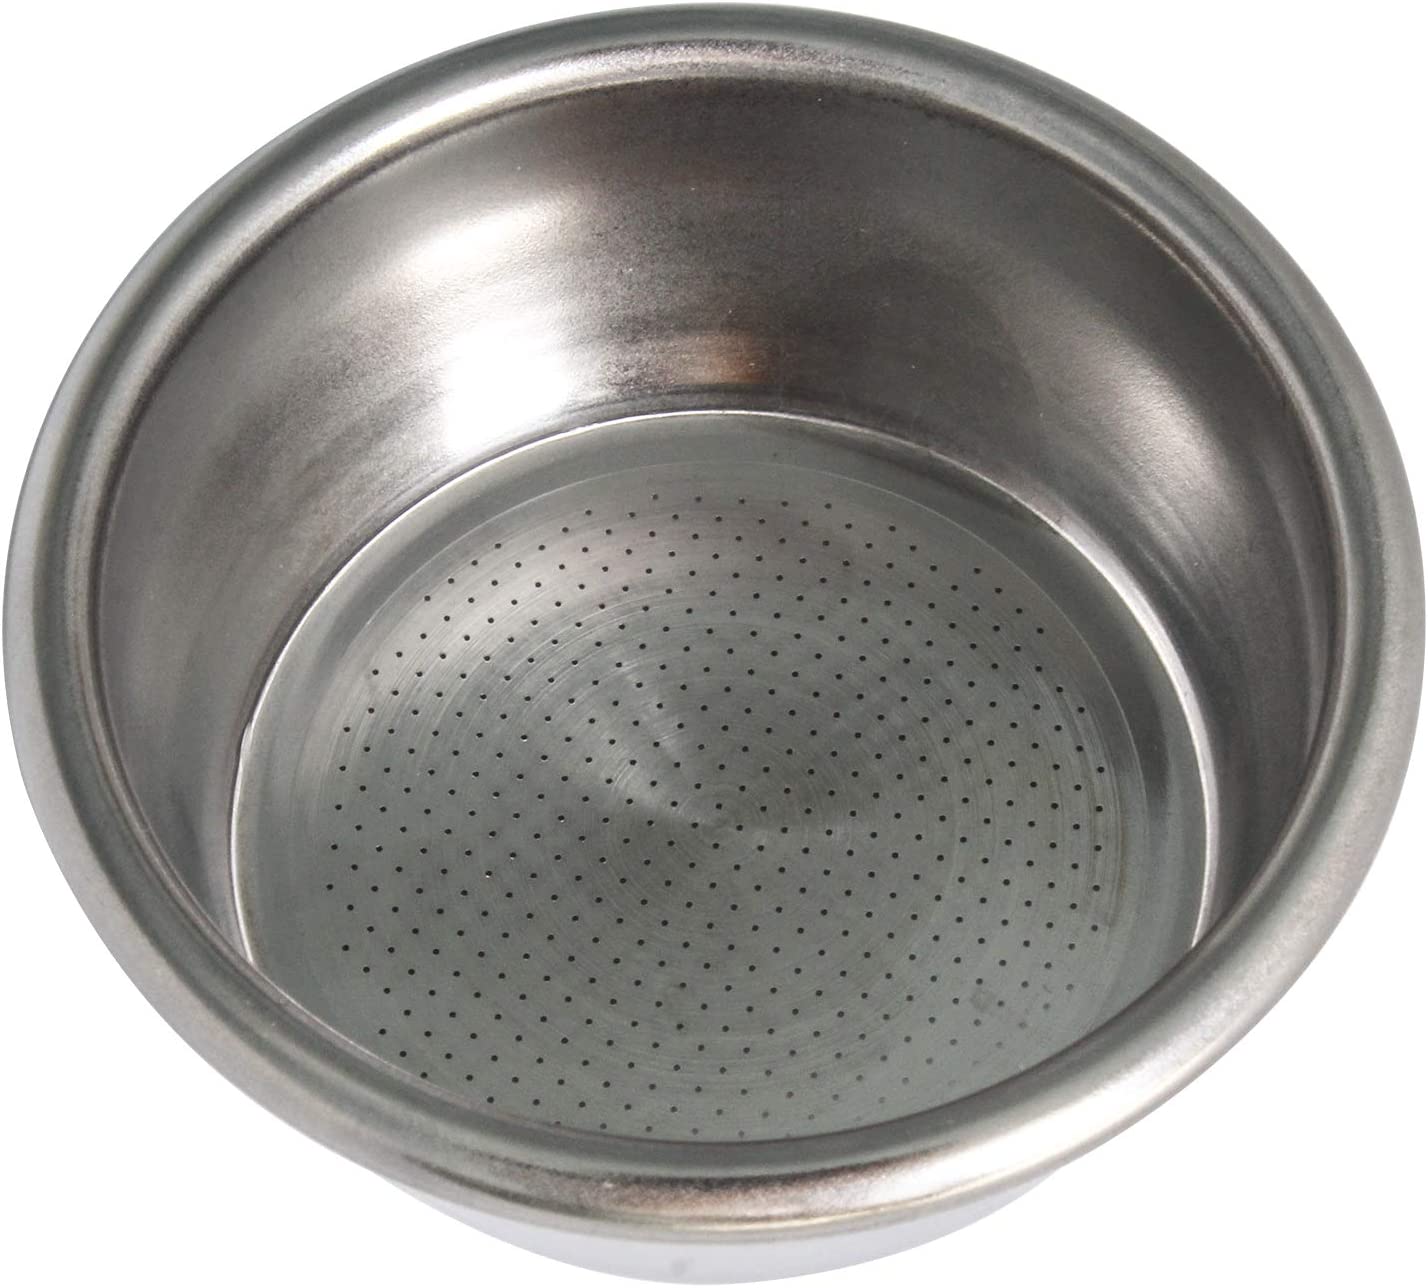 54mm Coffee Stainless Filter Basket, Two Cup-Single Wall, Non-pressure Filter Accessories Compatible with Breville 54mm Portafilter, Fit Breville Barista Express/Pro/Touch, Infuser, Duo-Temp Pro